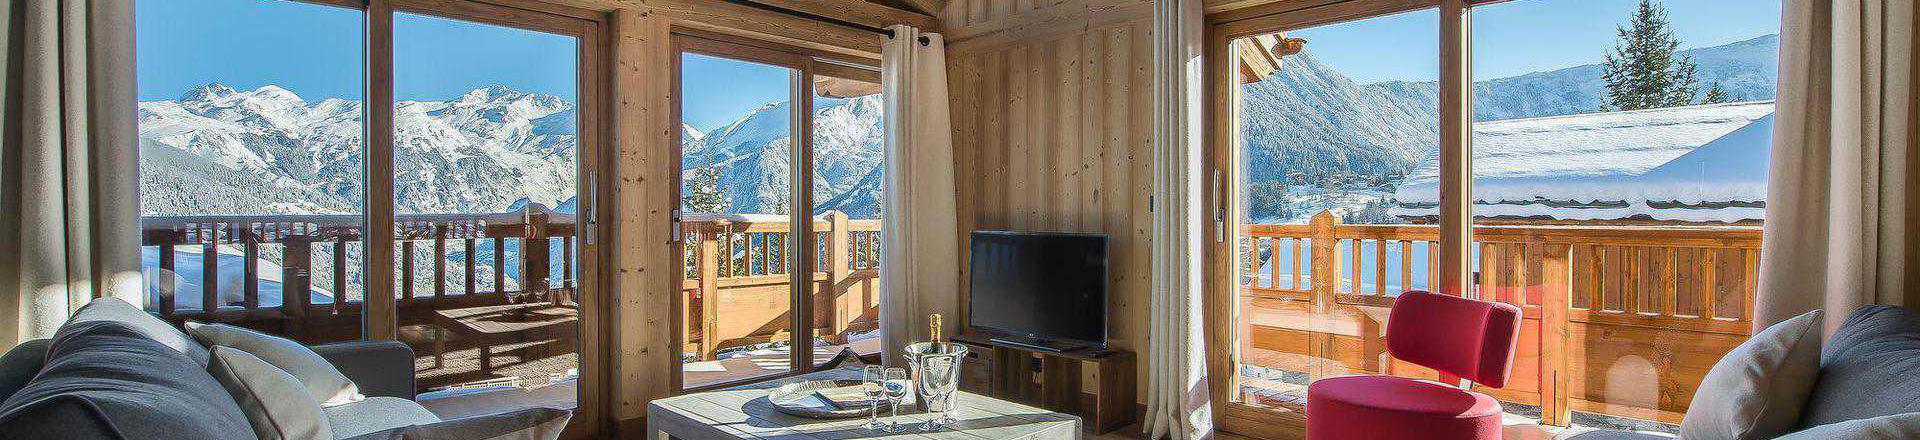 Rent in ski resort 6 room chalet 10 people - Chalet Ancolie - Courchevel - Living room